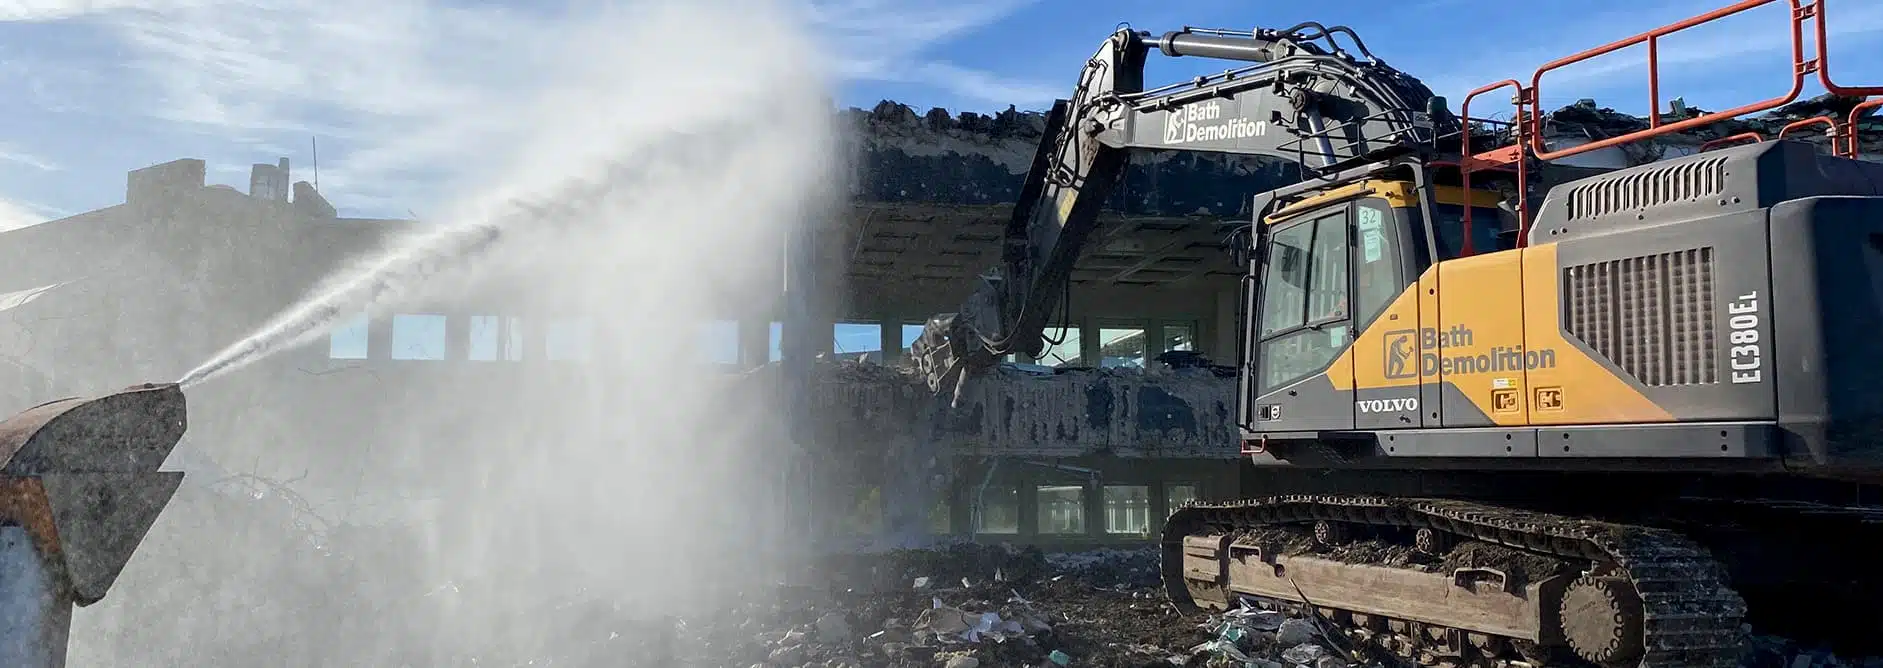 Site Clearance is part of the Demolition Process carried out by the team at Bath Demolition. From Site preparation, to demolition and site clearance, Bath Demo can help